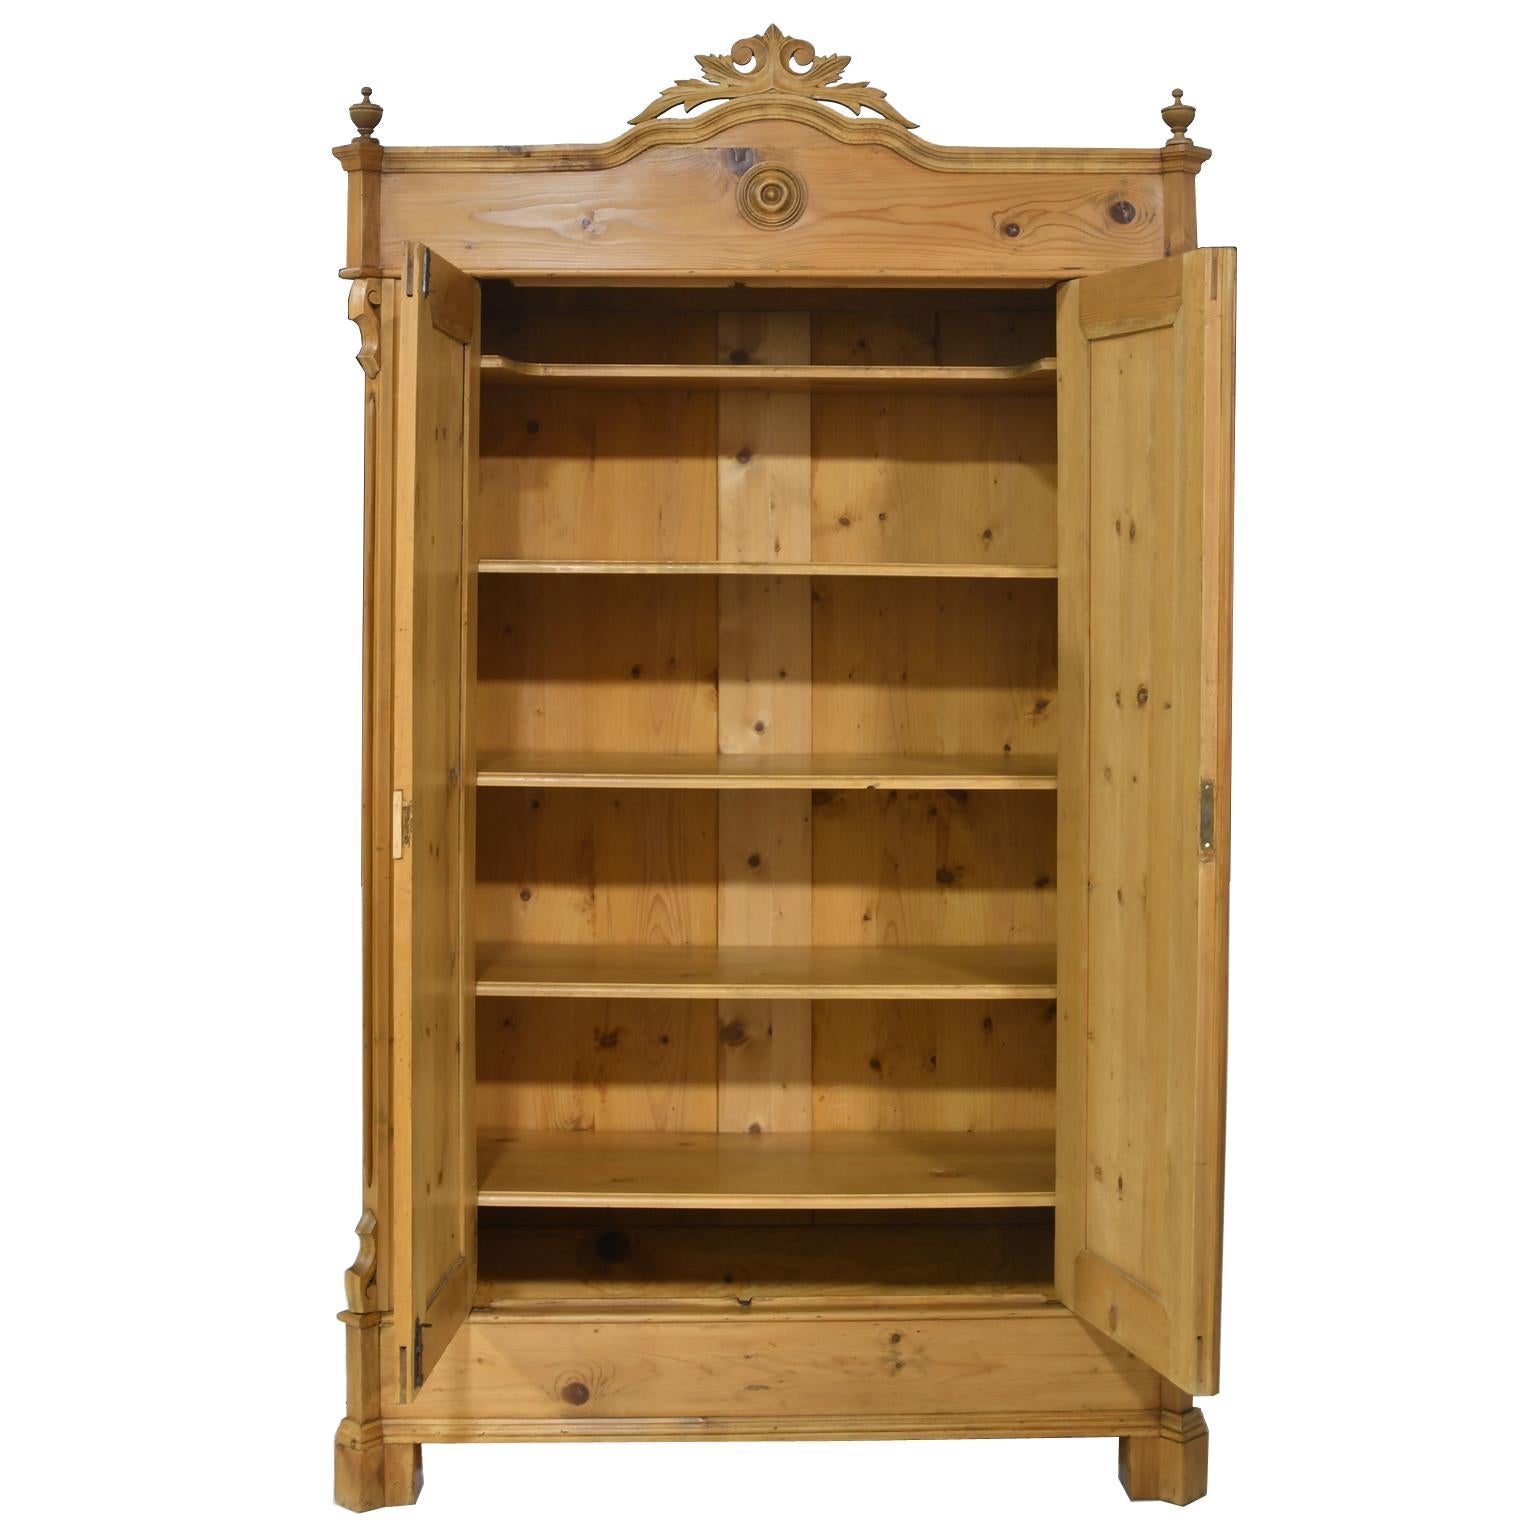 A charming antique Louis Philippe pine armoire with carved foliate bonnet and turned finials on corners of crown molding, with reeded stiles, paneled sides and two paneled doors that open to five adjustable shelves, Germany, circa 1860. Armoire has